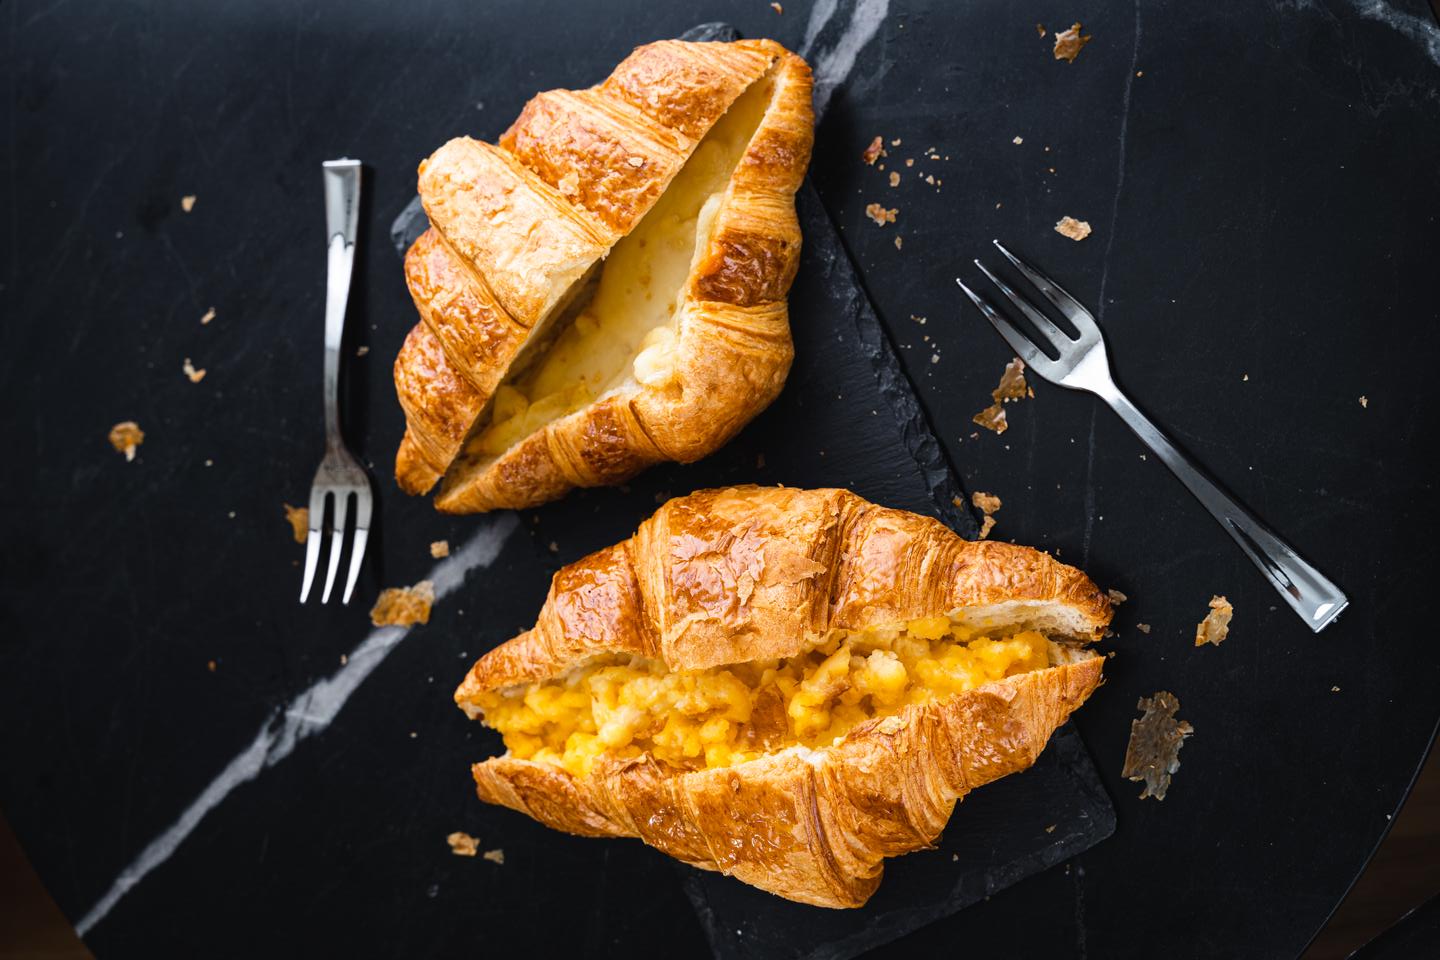 Enjoy an All-You-Can-Eat 🍳 Breakfast Buffet and We’ll Reveal What Type of Partner 😍 Attracts You Croissant